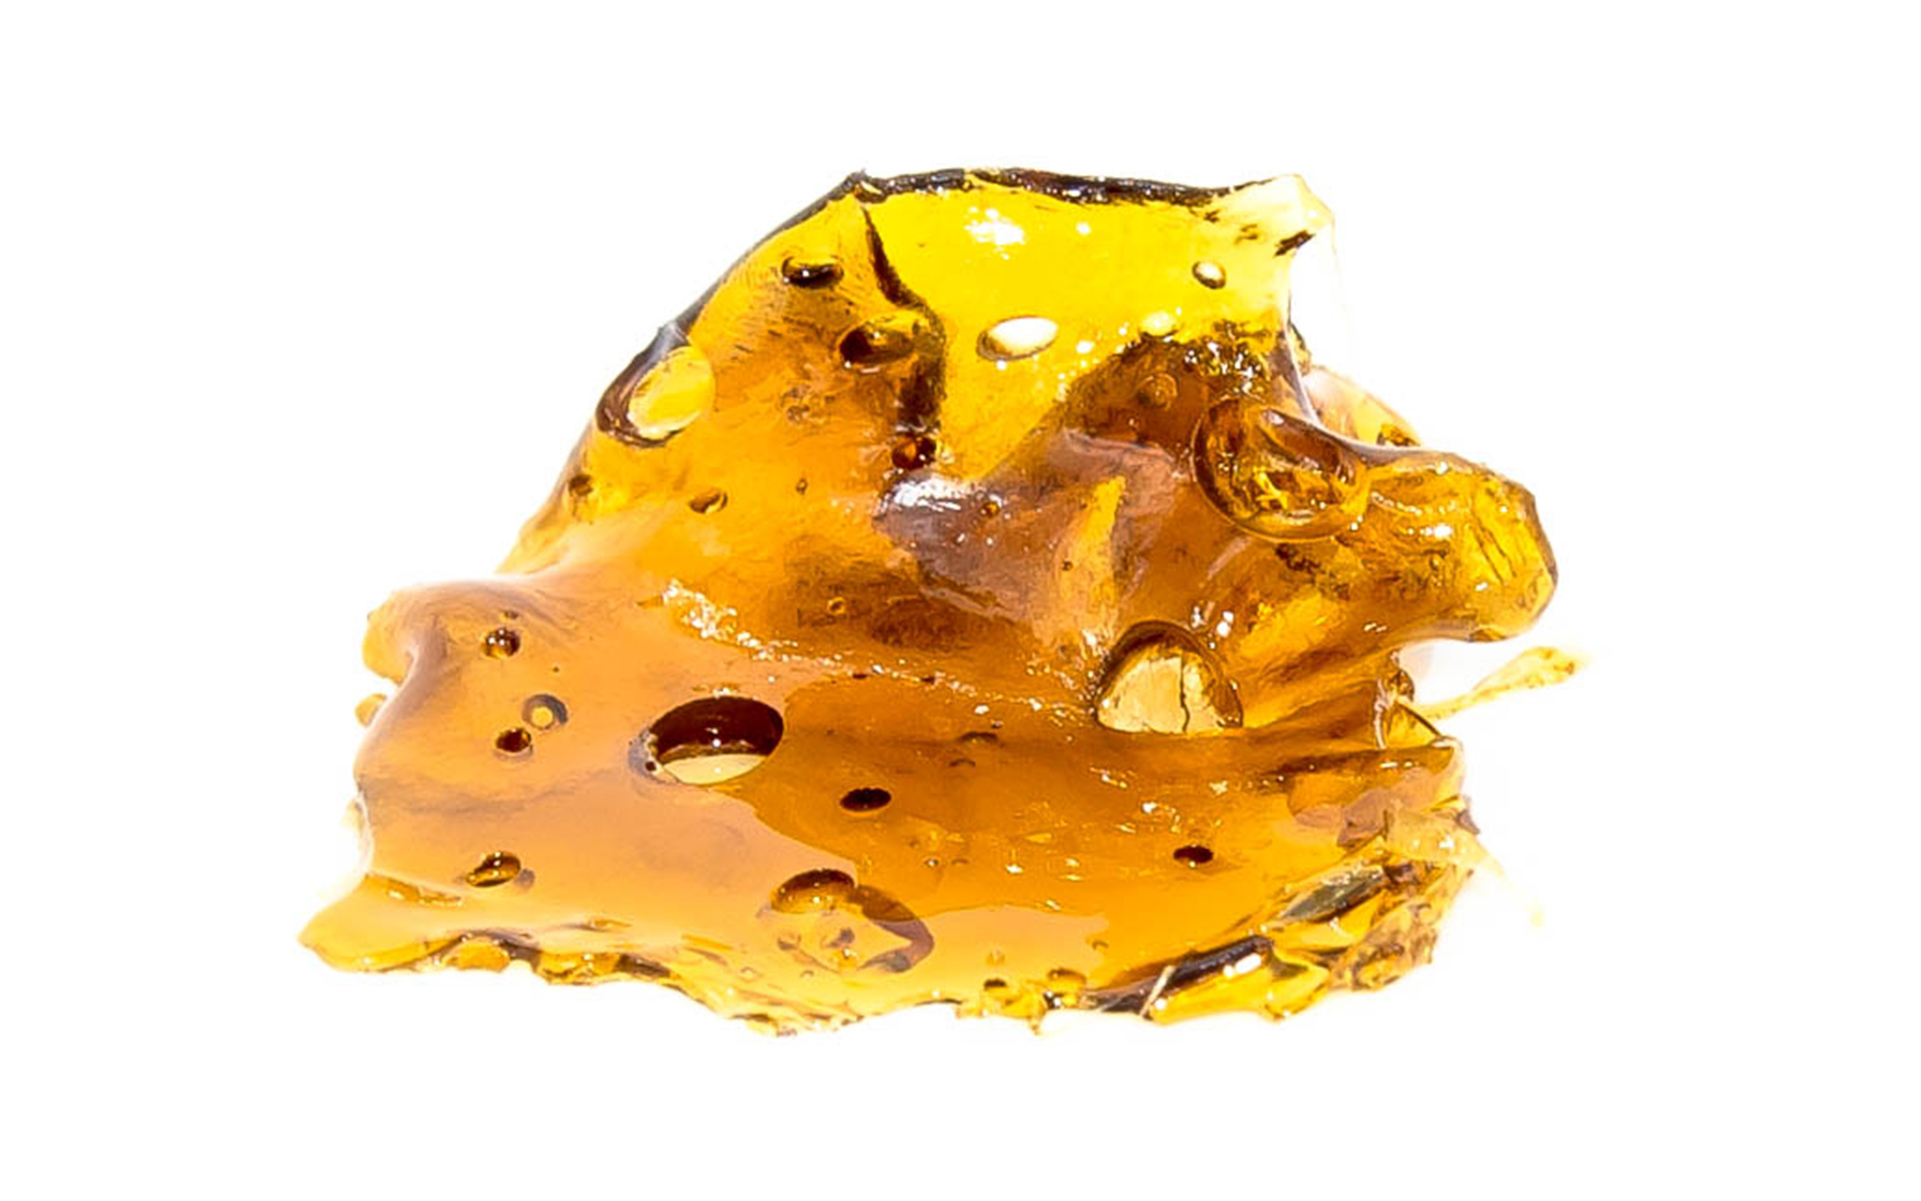 Cbd shatter, cannabis concentrate, cannabis extract 